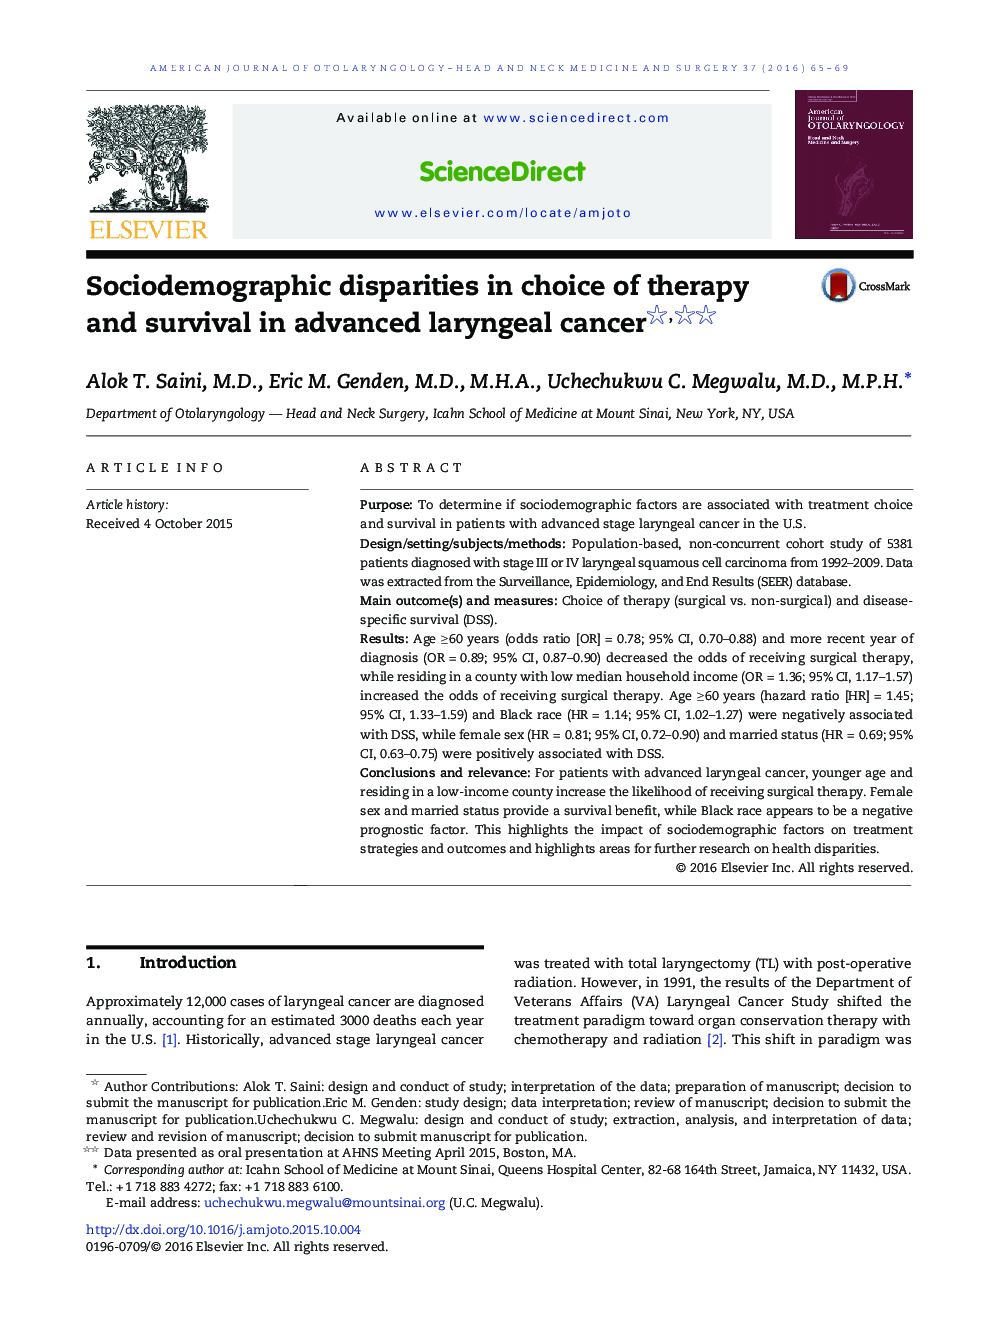 Sociodemographic disparities in choice of therapy and survival in advanced laryngeal cancer 